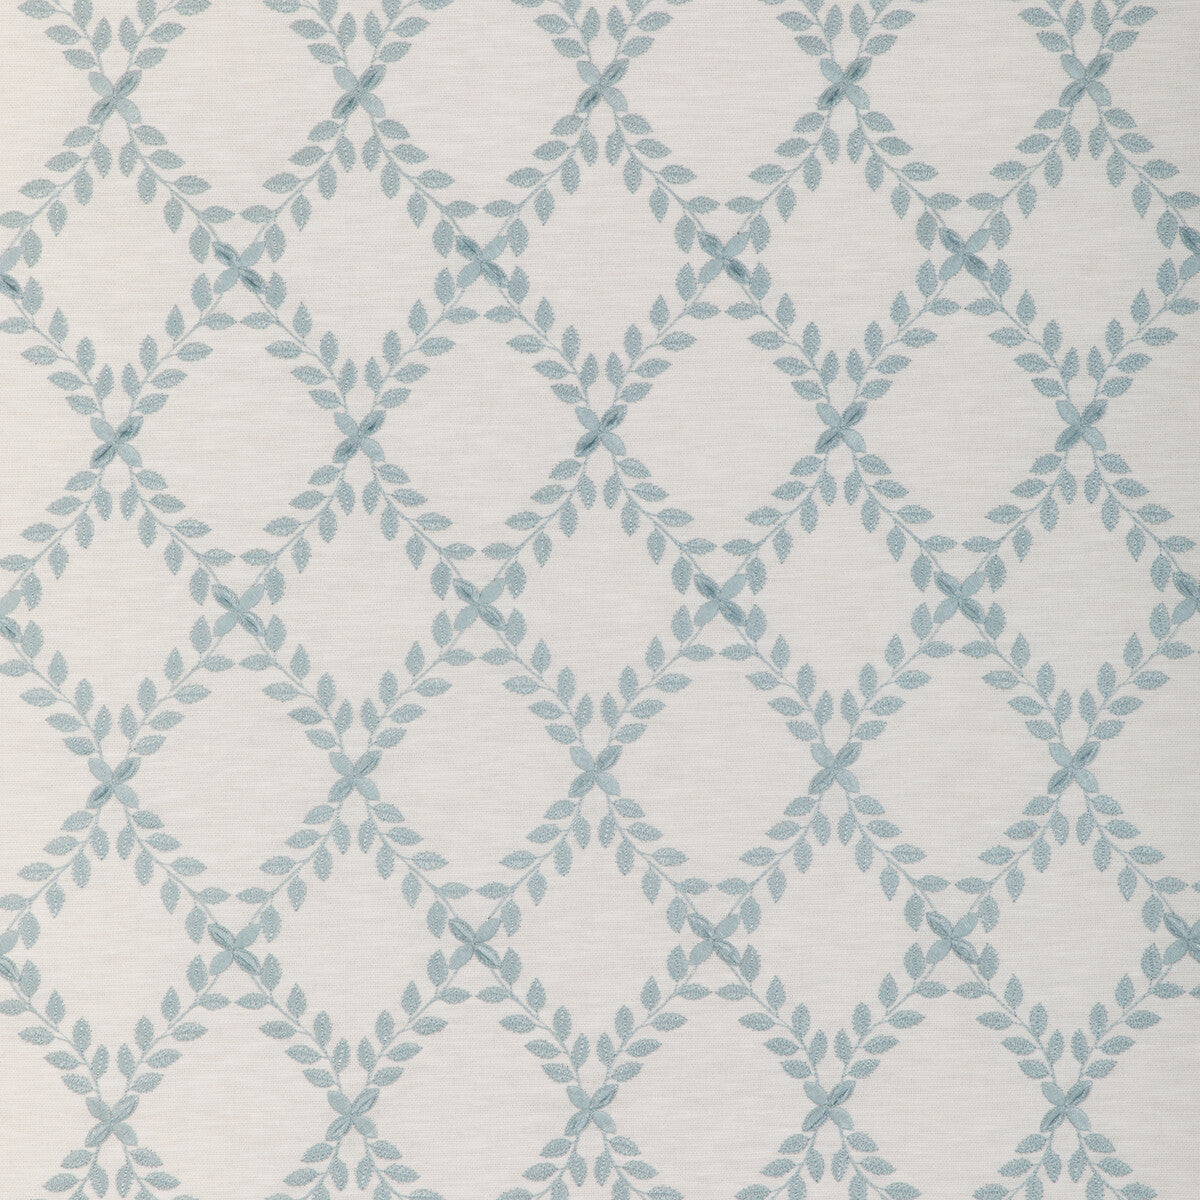 Kravet Basics fabric in 37090-5 color - pattern 37090.15.0 - by Kravet Basics in the Modern Embroideries III collection